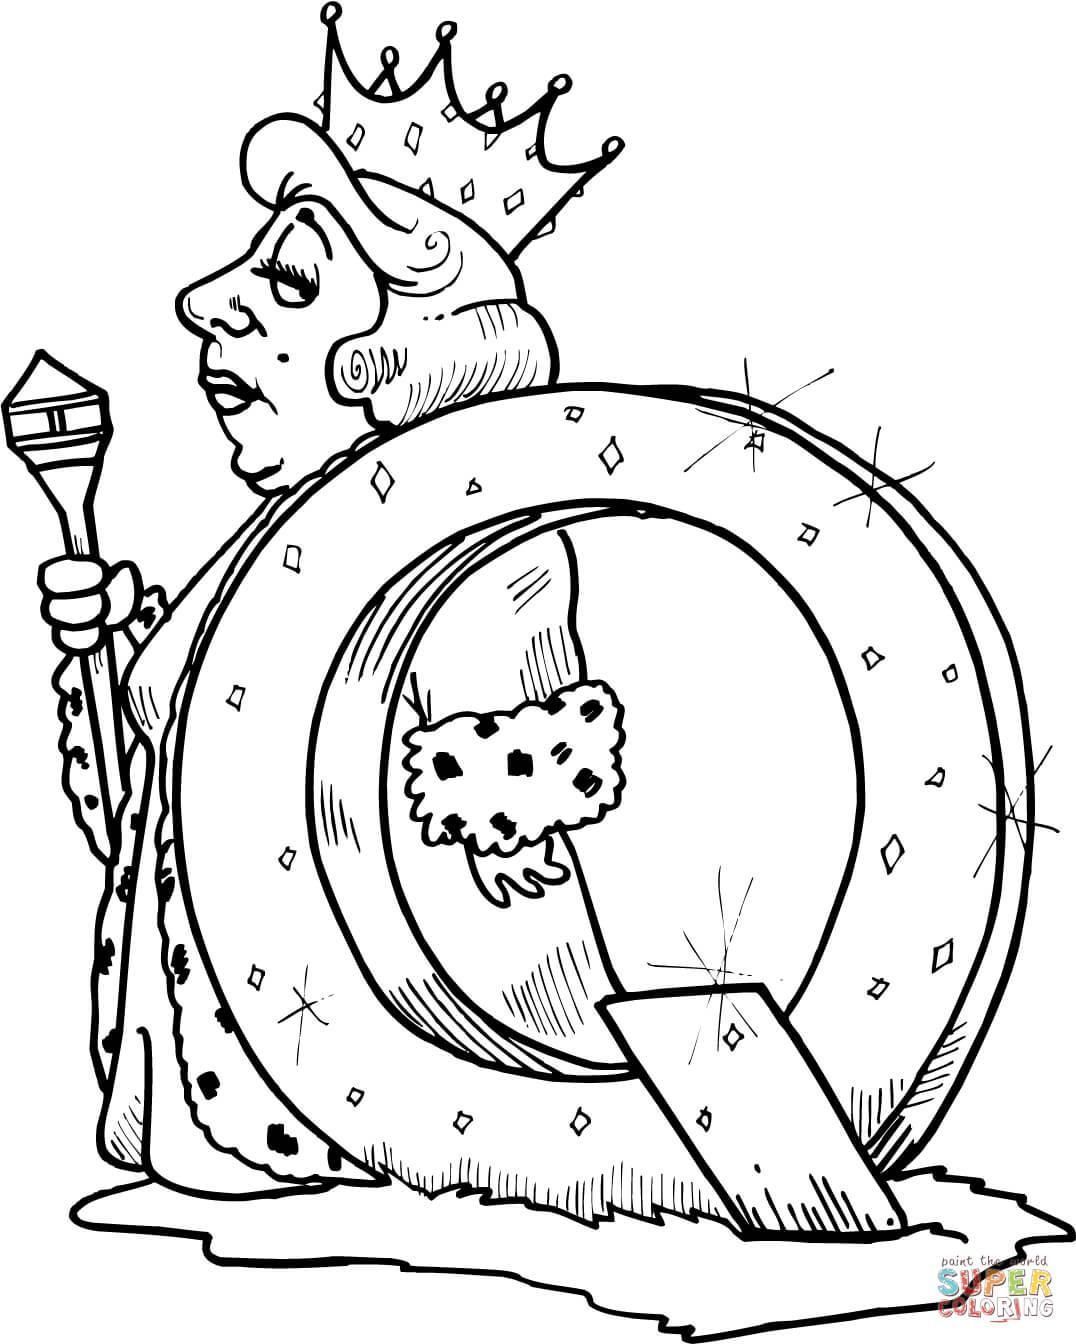 Queen Elizabeth Ii Coloring Pages at GetColorings.com | Free printable